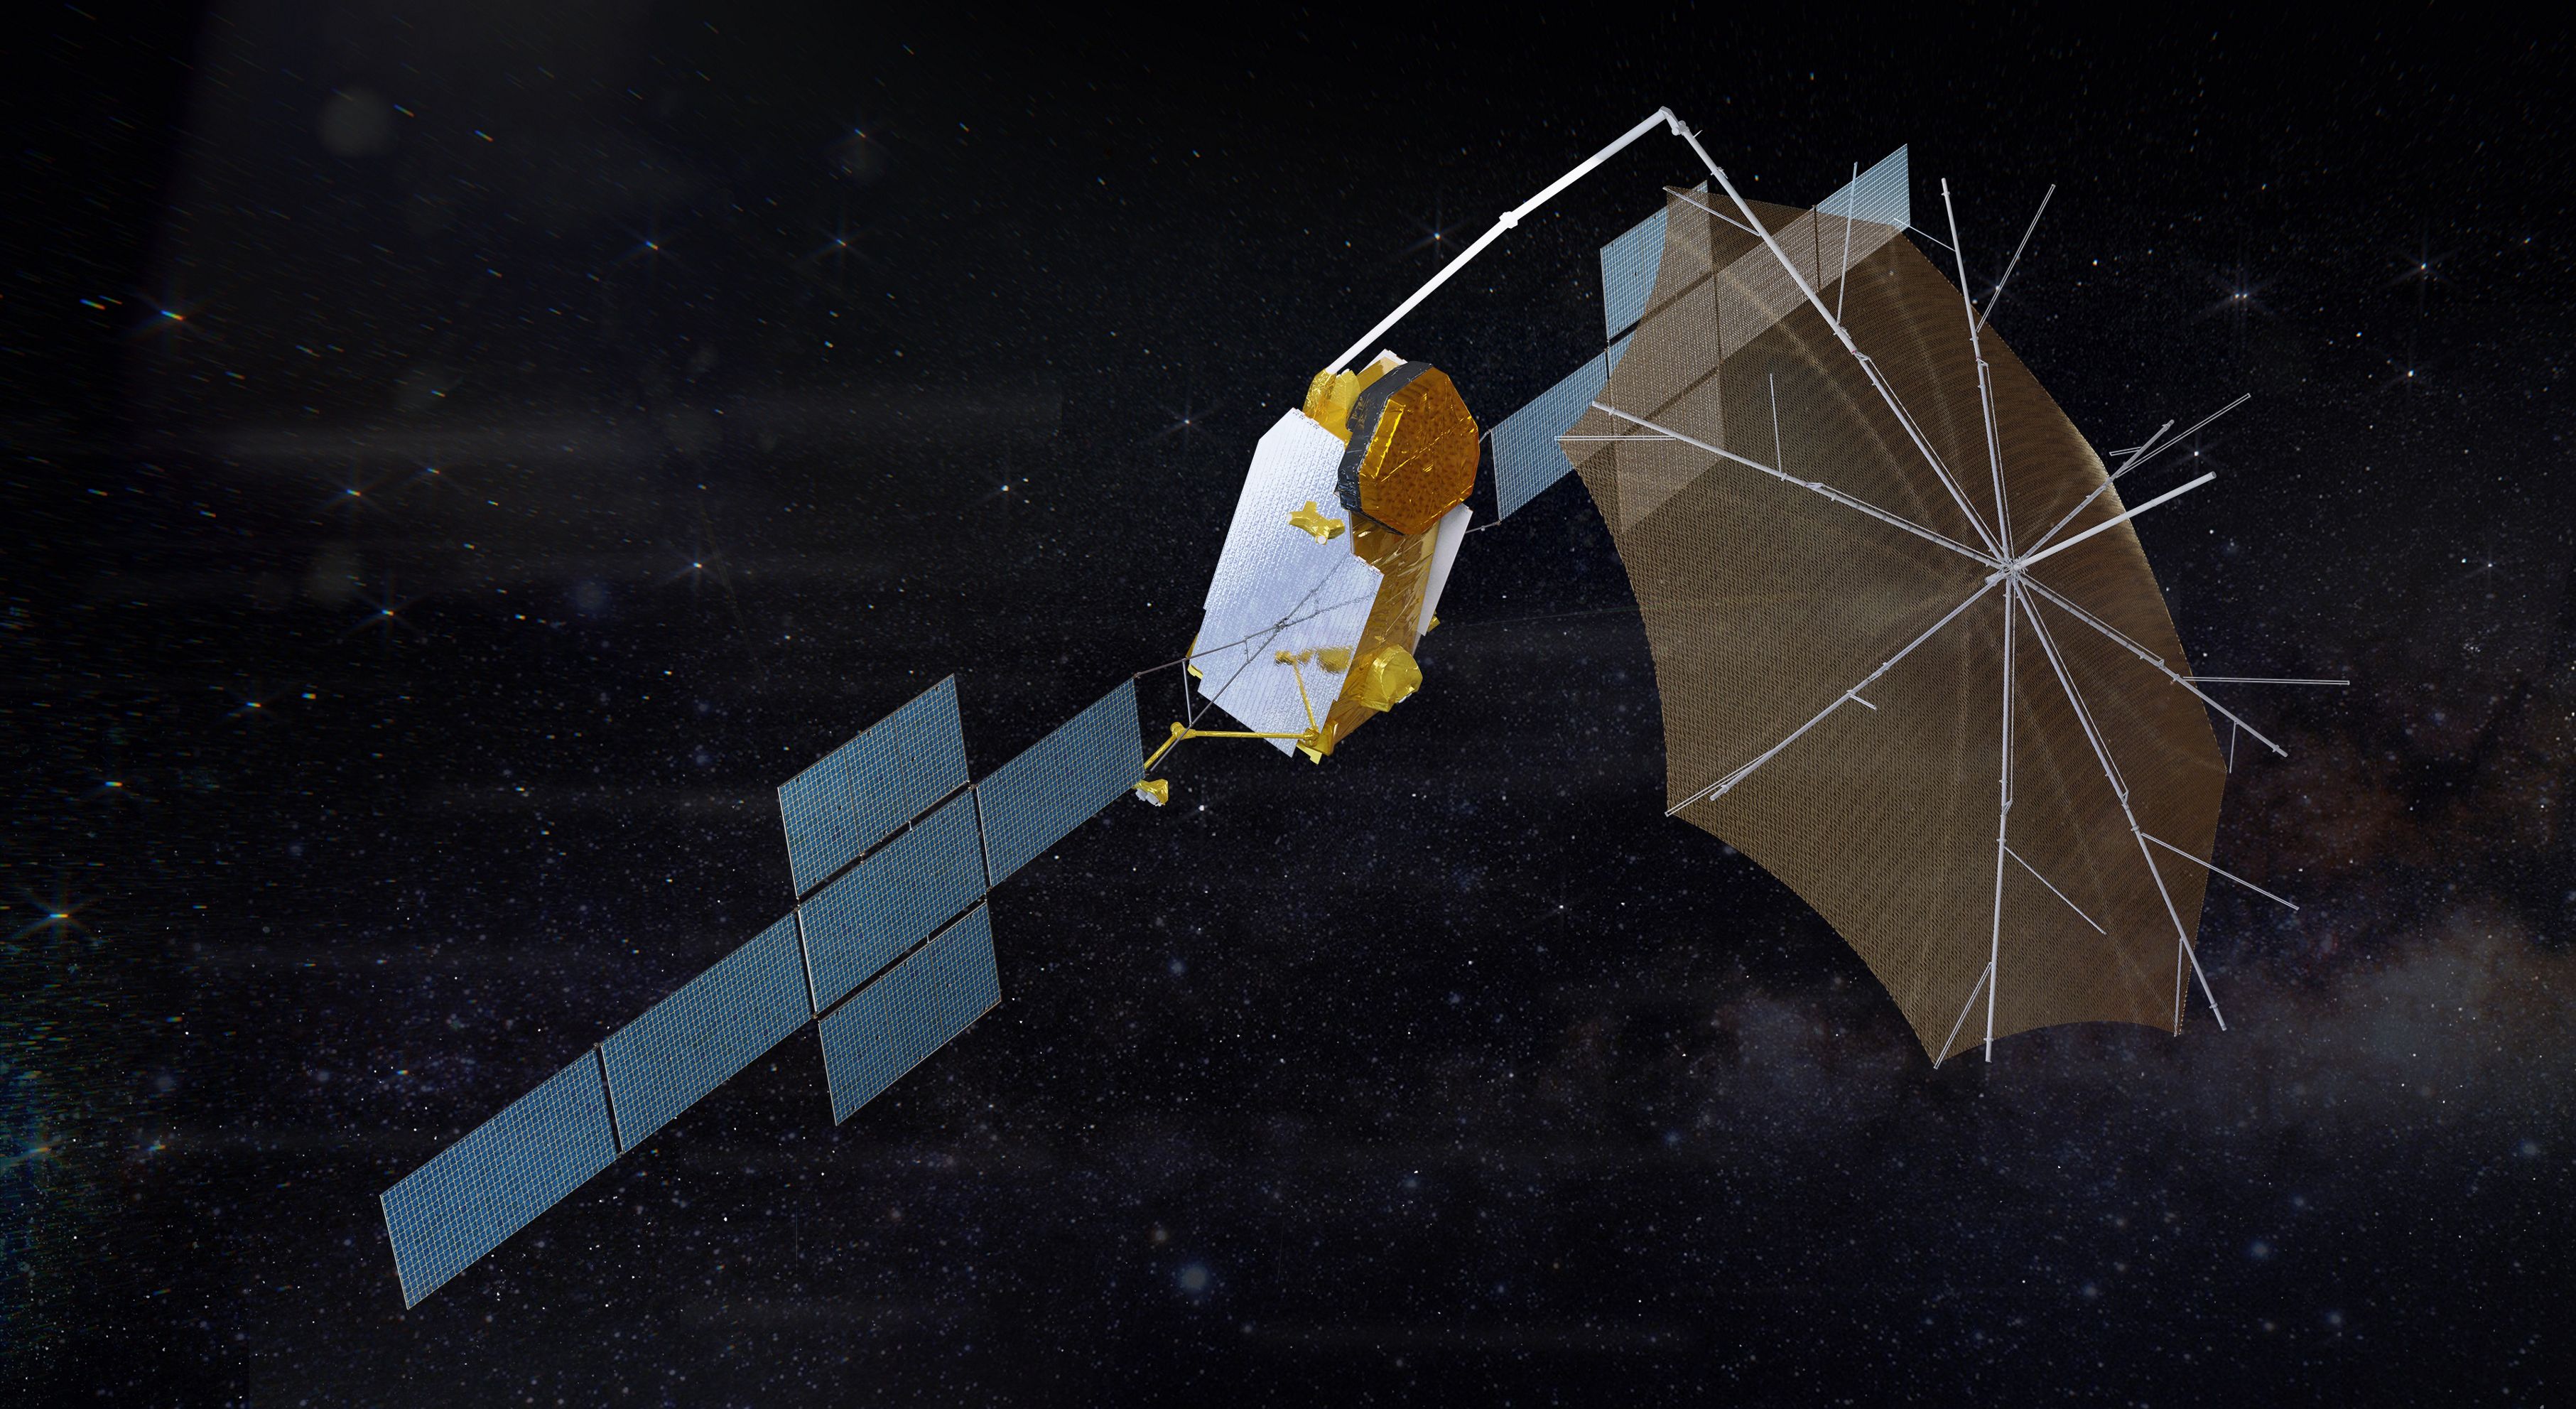 Yahsat signs contract with Airbus to build Thuraya's next generation system - Space - Airbus